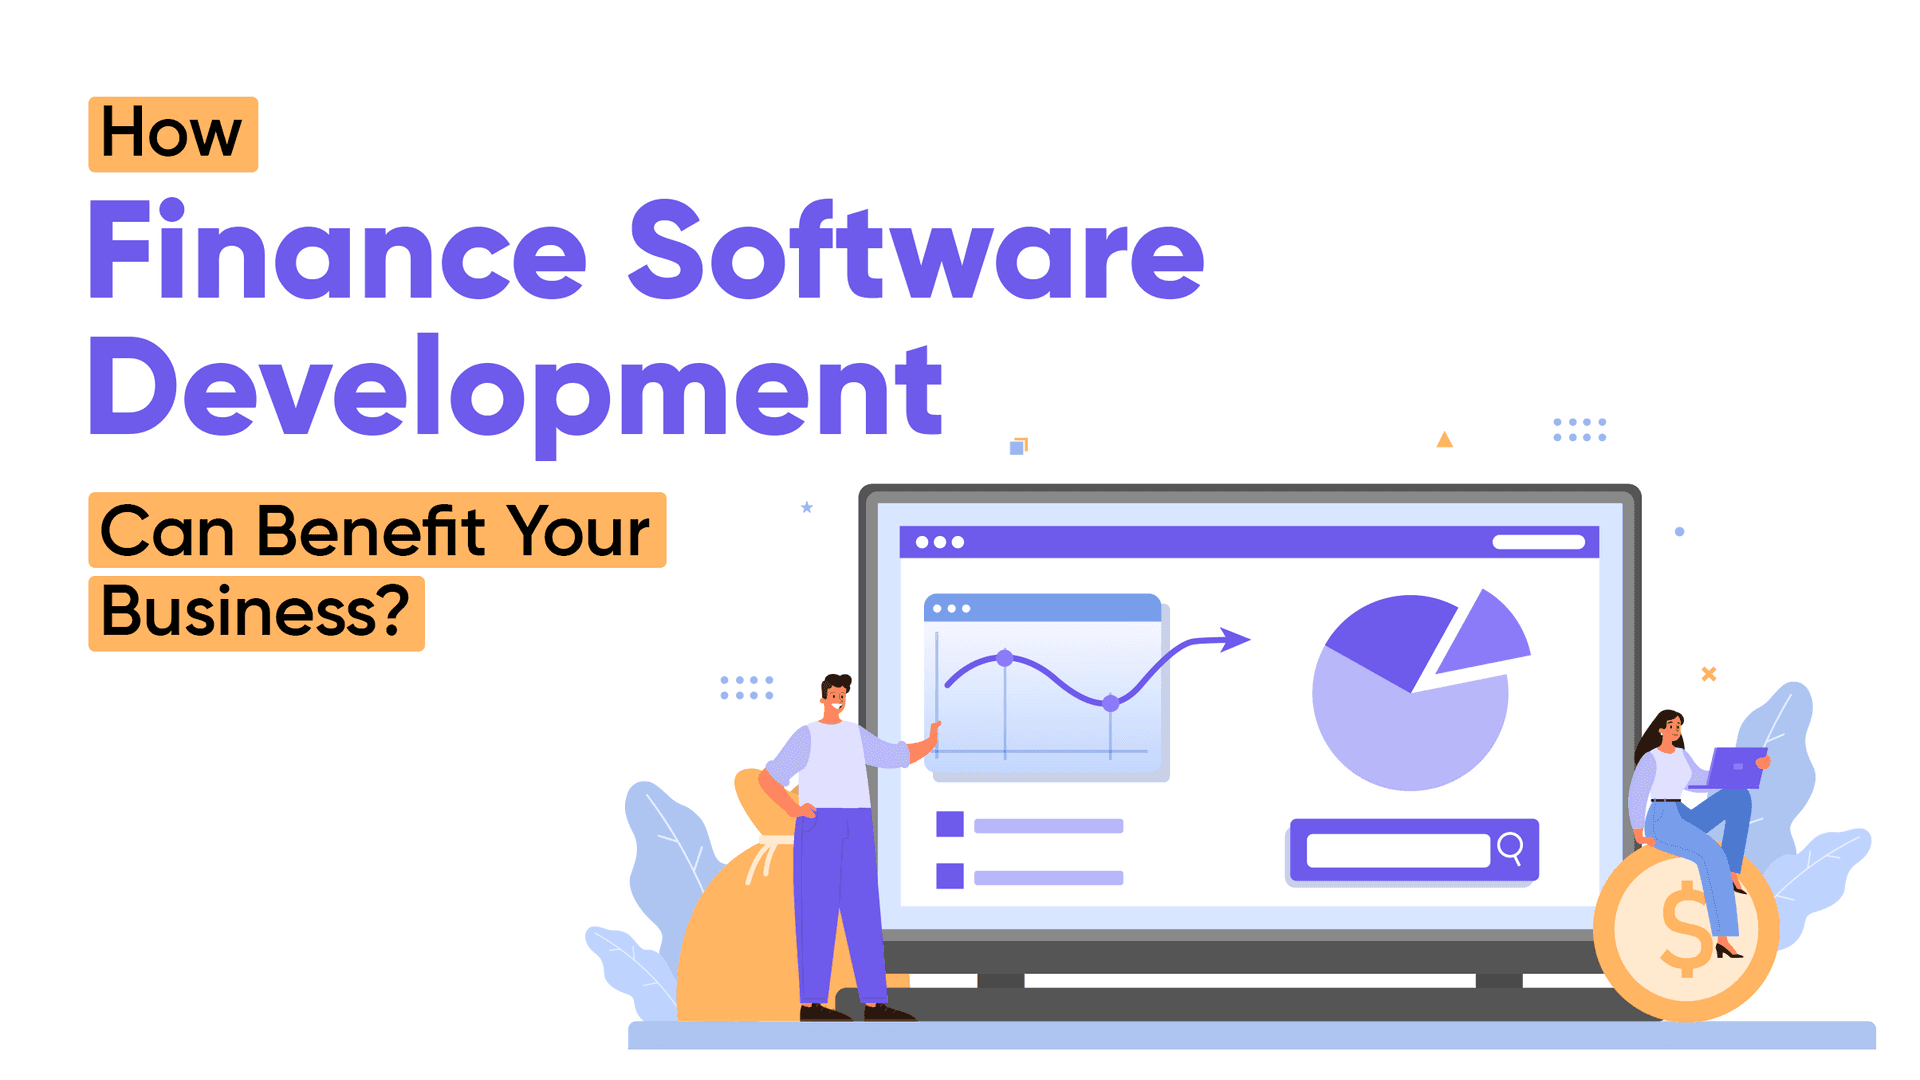 How Finance Software Development Can Benefit Your Business?